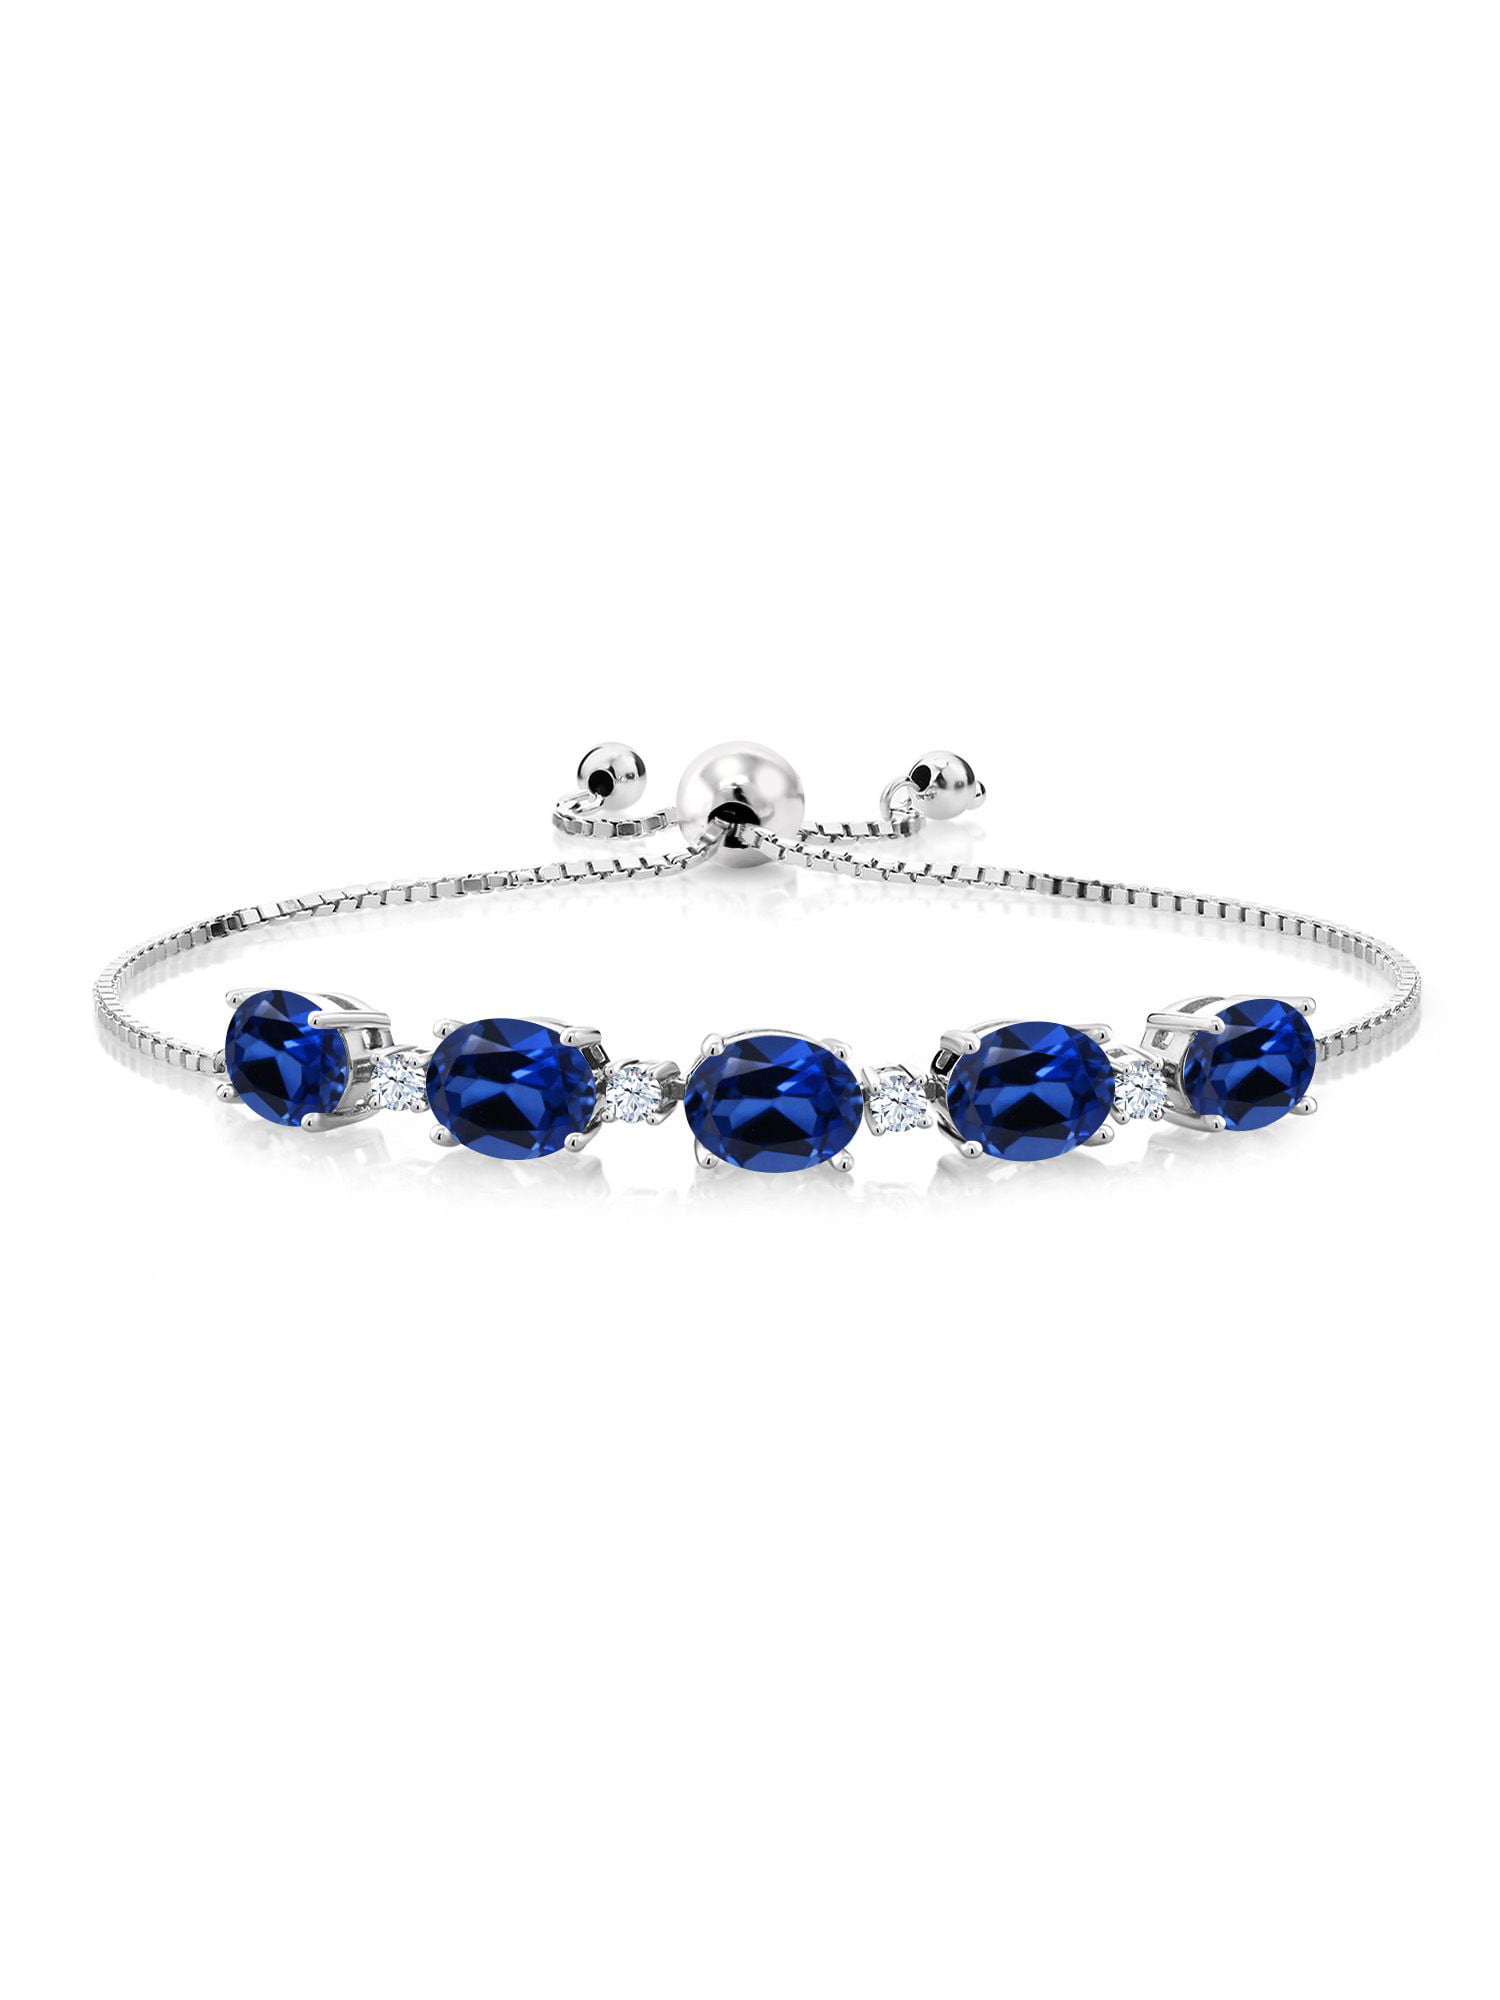 Gem Stone King 8.20 Ct Oval Blue Created Sapphire 925 Sterling